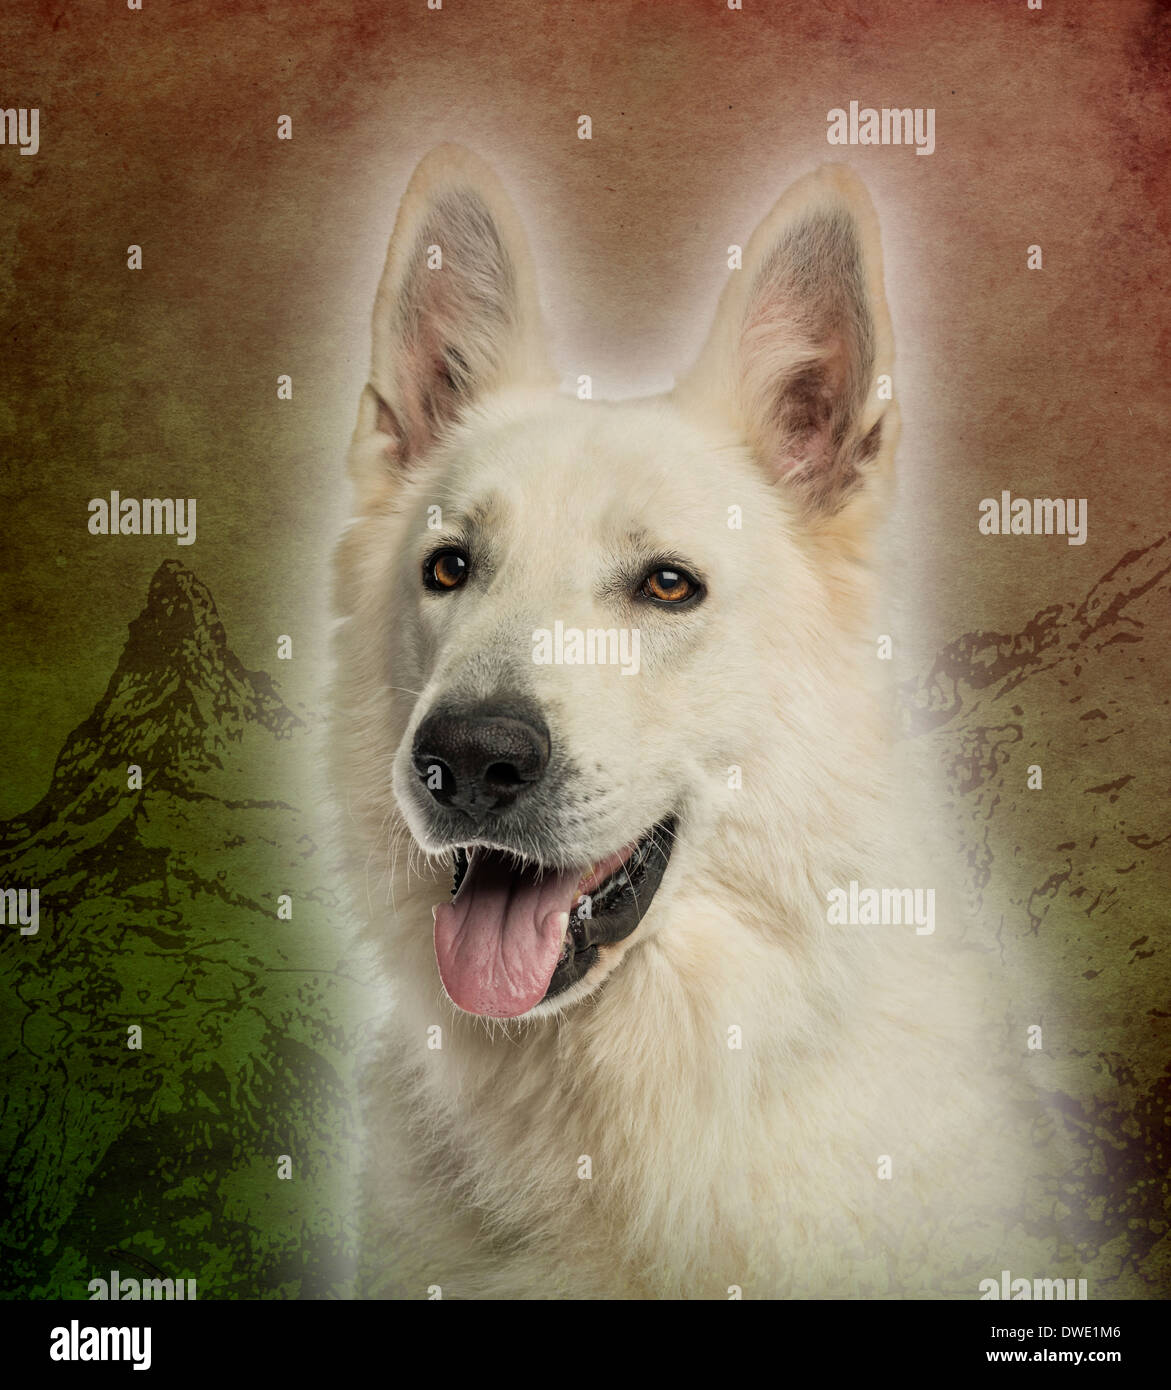 Close-up of a White Swiss Shepherd Dog panting on a vintage colored background Stock Photo